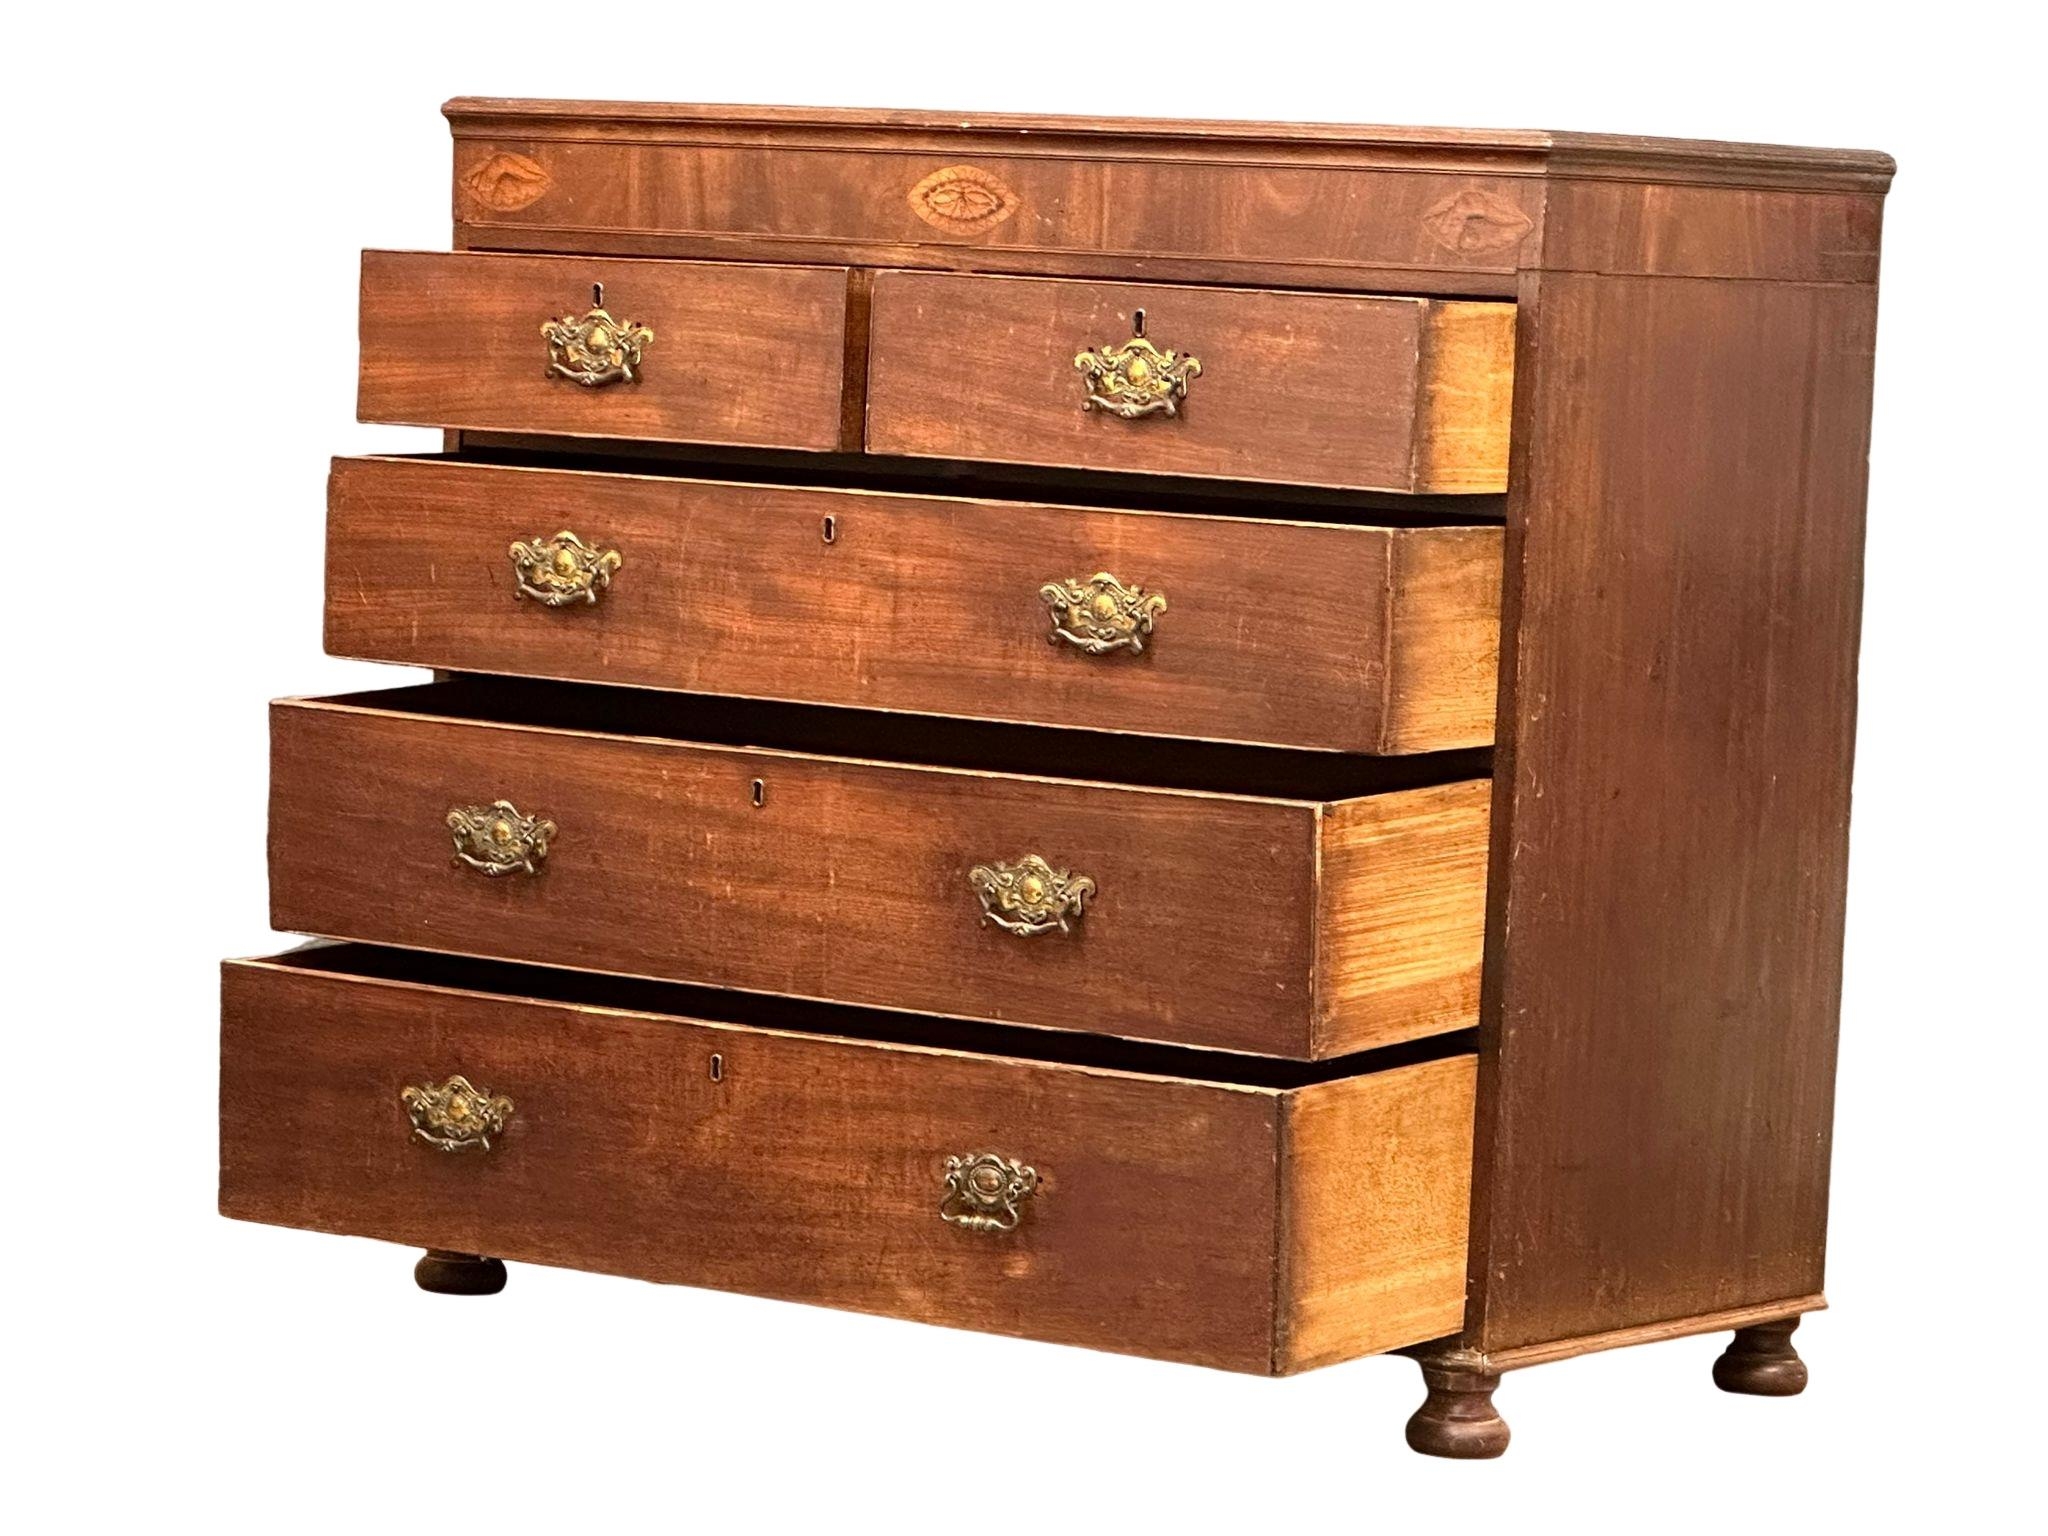 A large late George III Inlaid mahogany chest of drawers, circa 1800-20. 115cm x 55cm x 105cm - Image 8 of 8